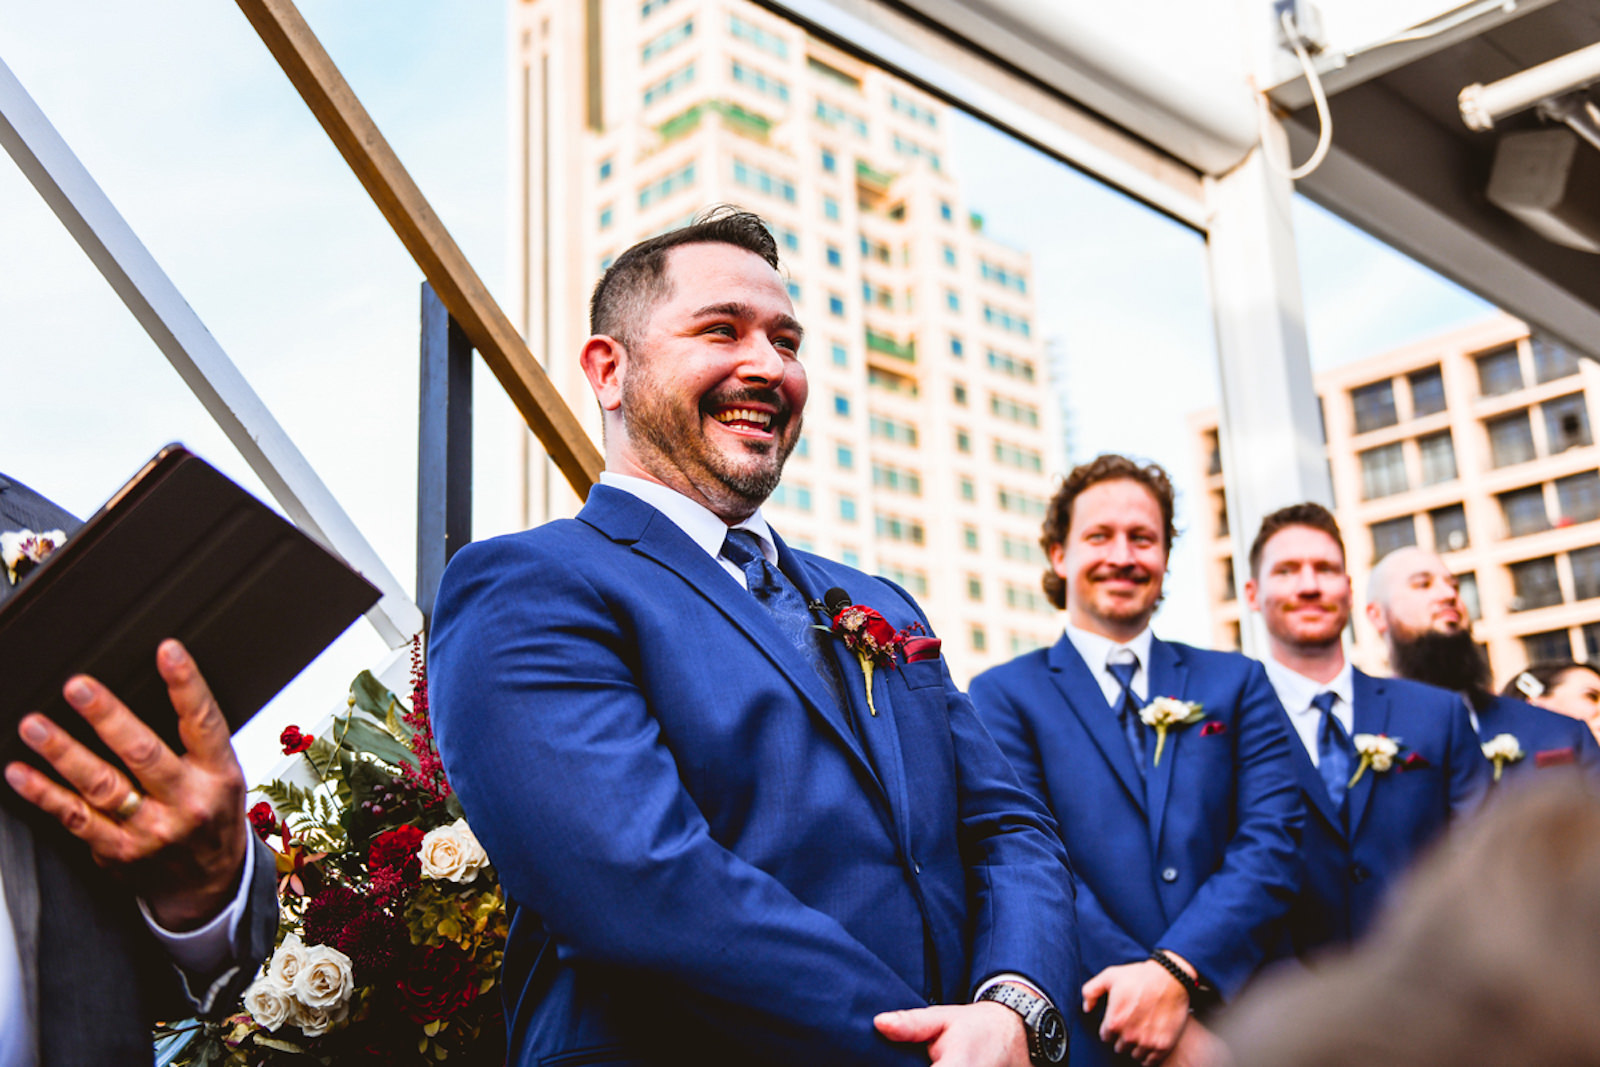 Tampa Groom in Blue Suit with Red Flower Boutonniere Happy Reaction to Seeing Bride During Rooftop Wedding Ceremony